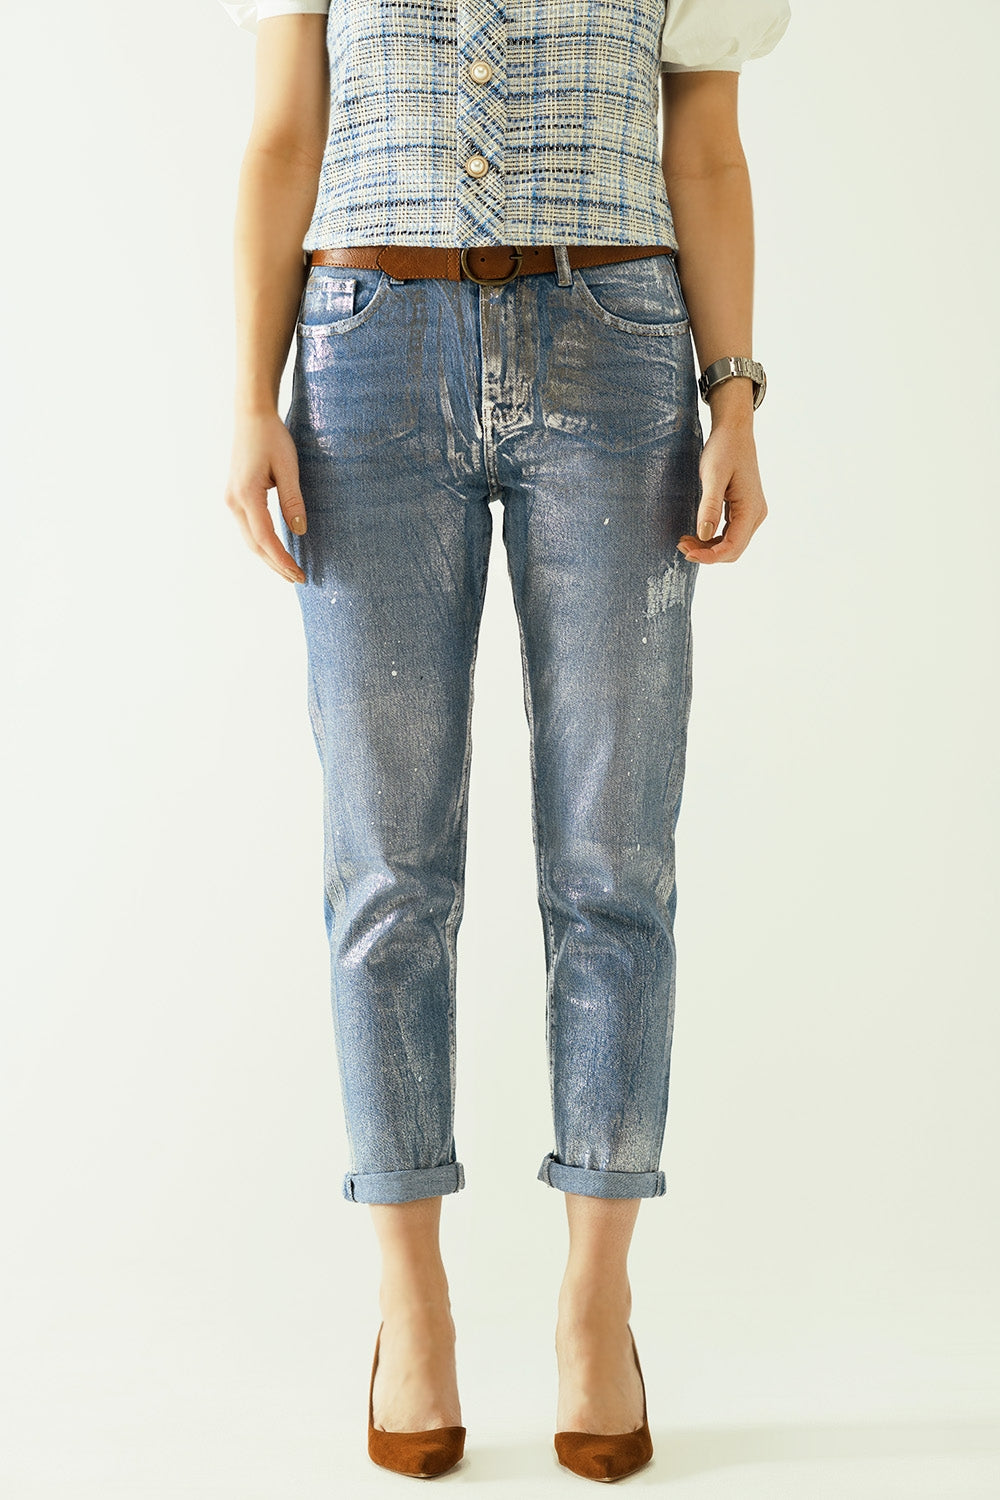 Q2 skinny blue jeans with metallic finish in light wash